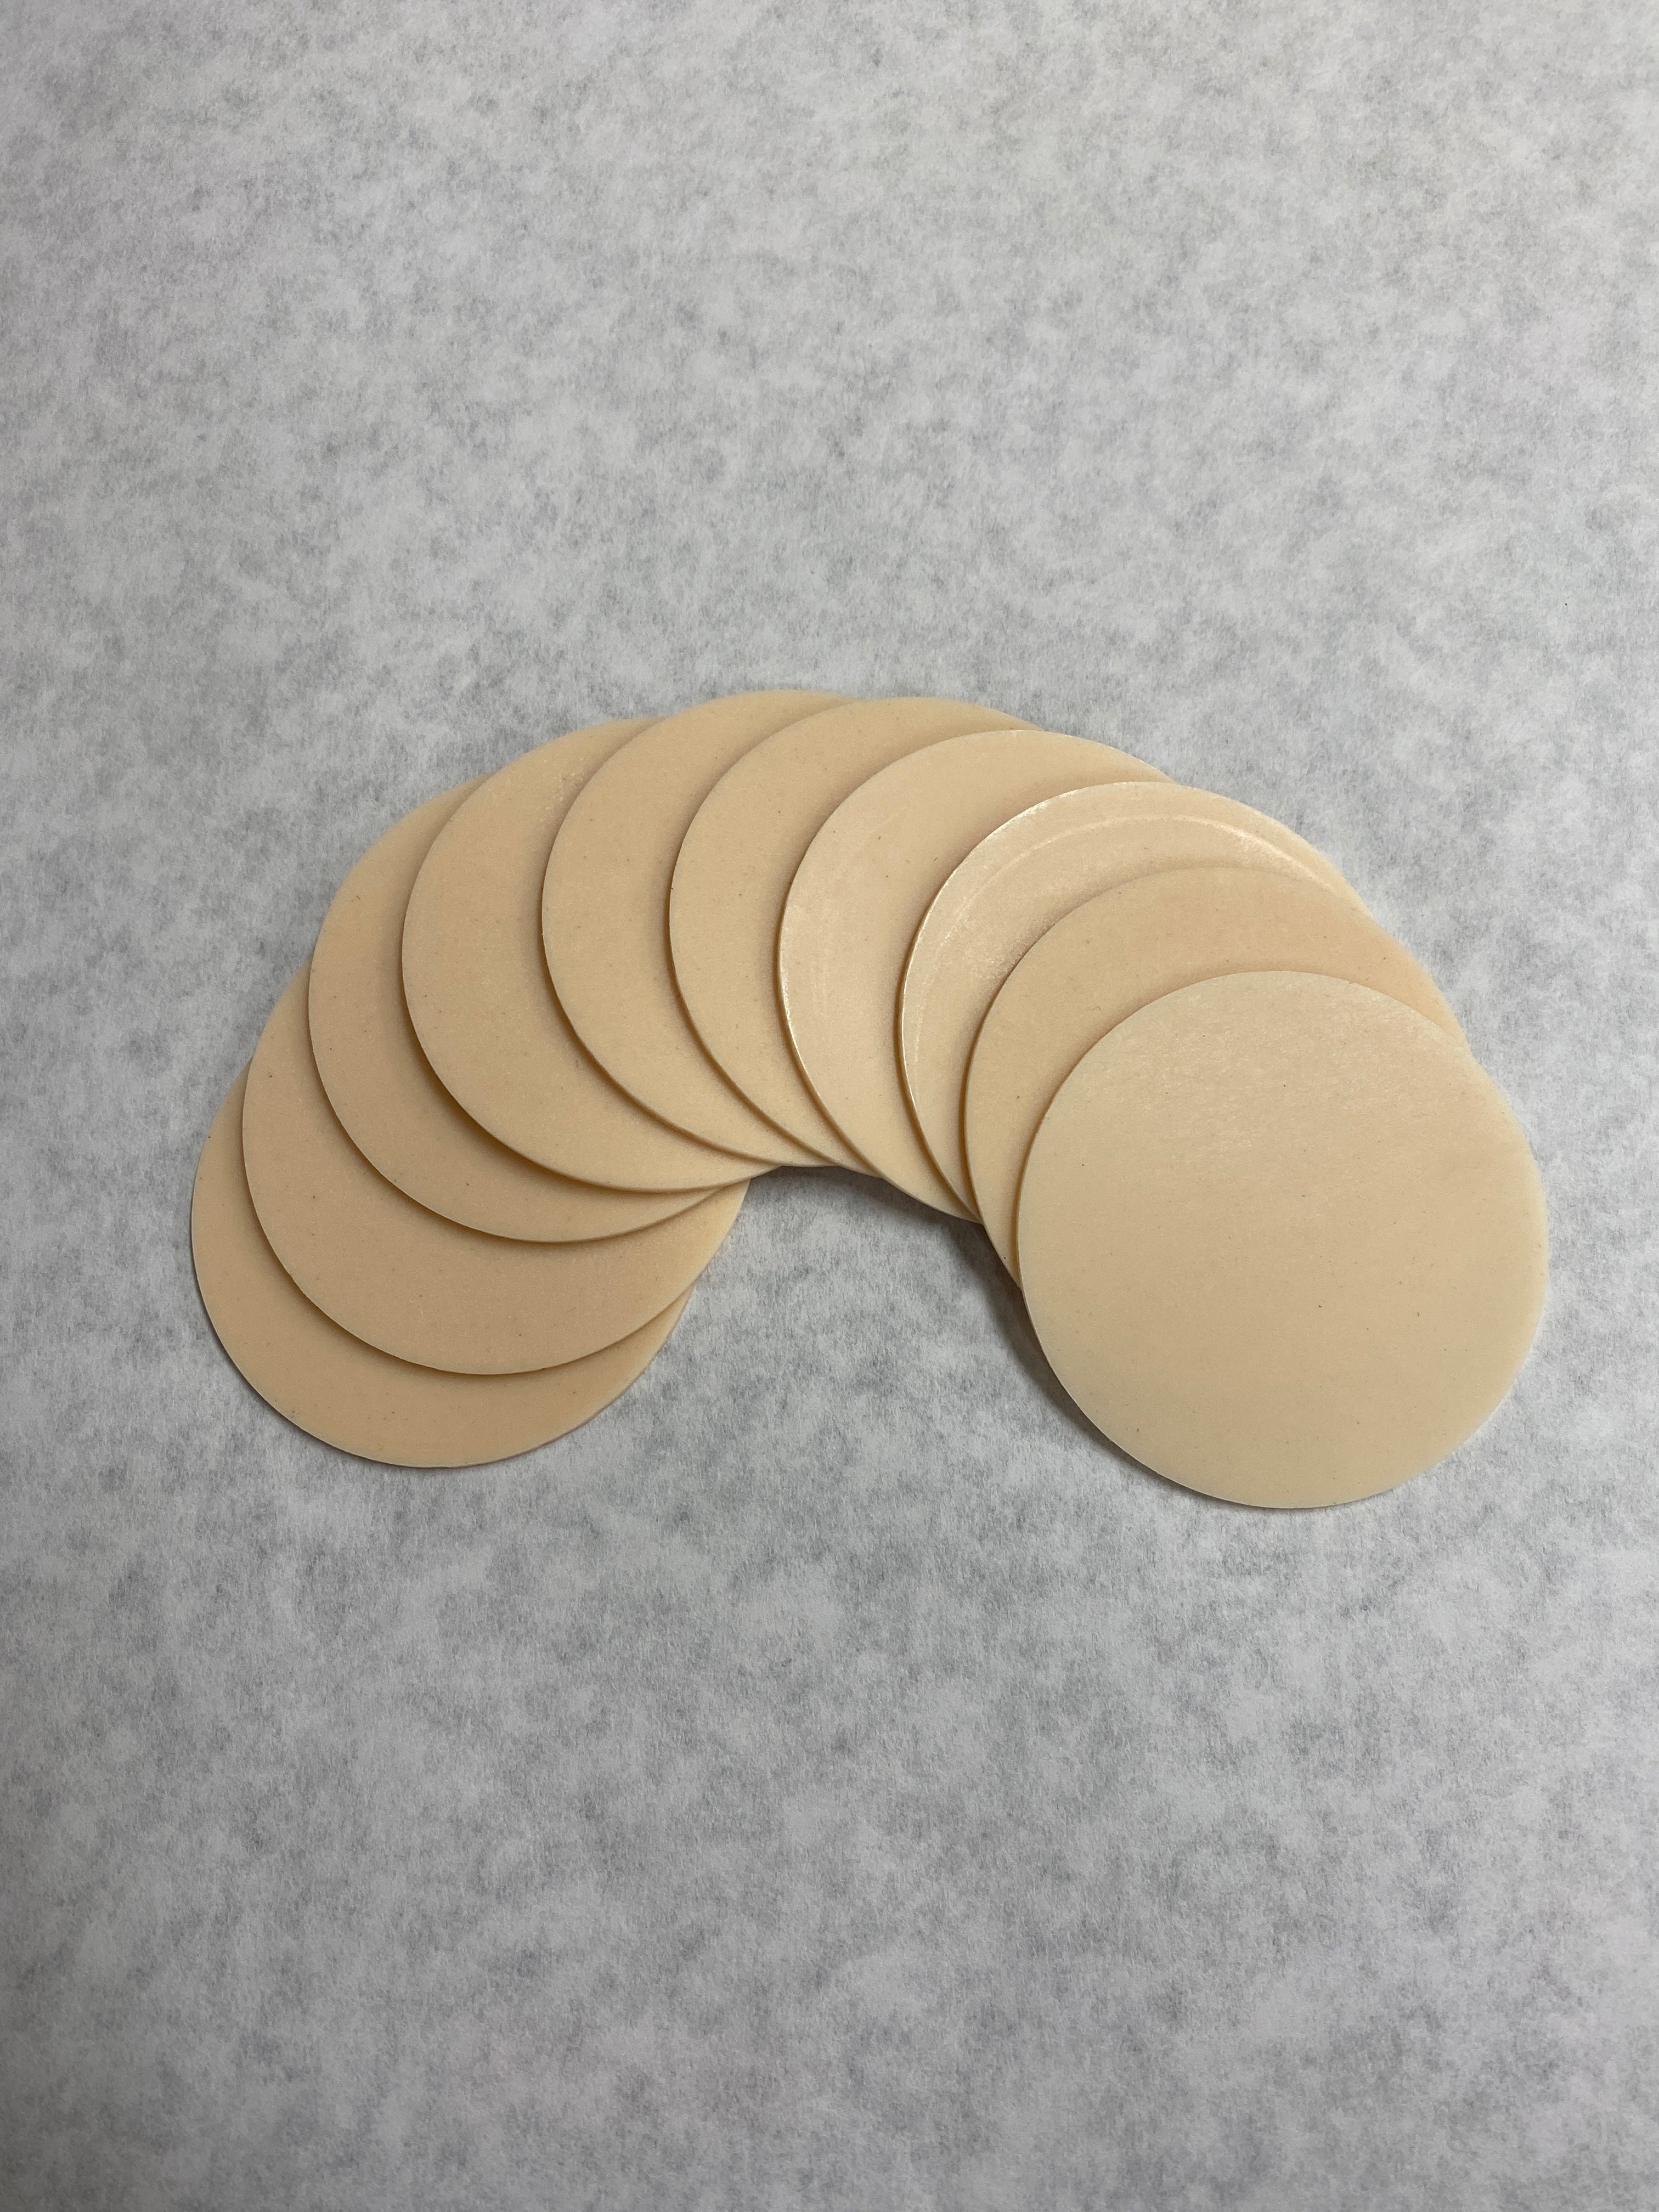 Discs for Areola Practice Mounds - 10 Discs (Tone Set) – ReelSkin